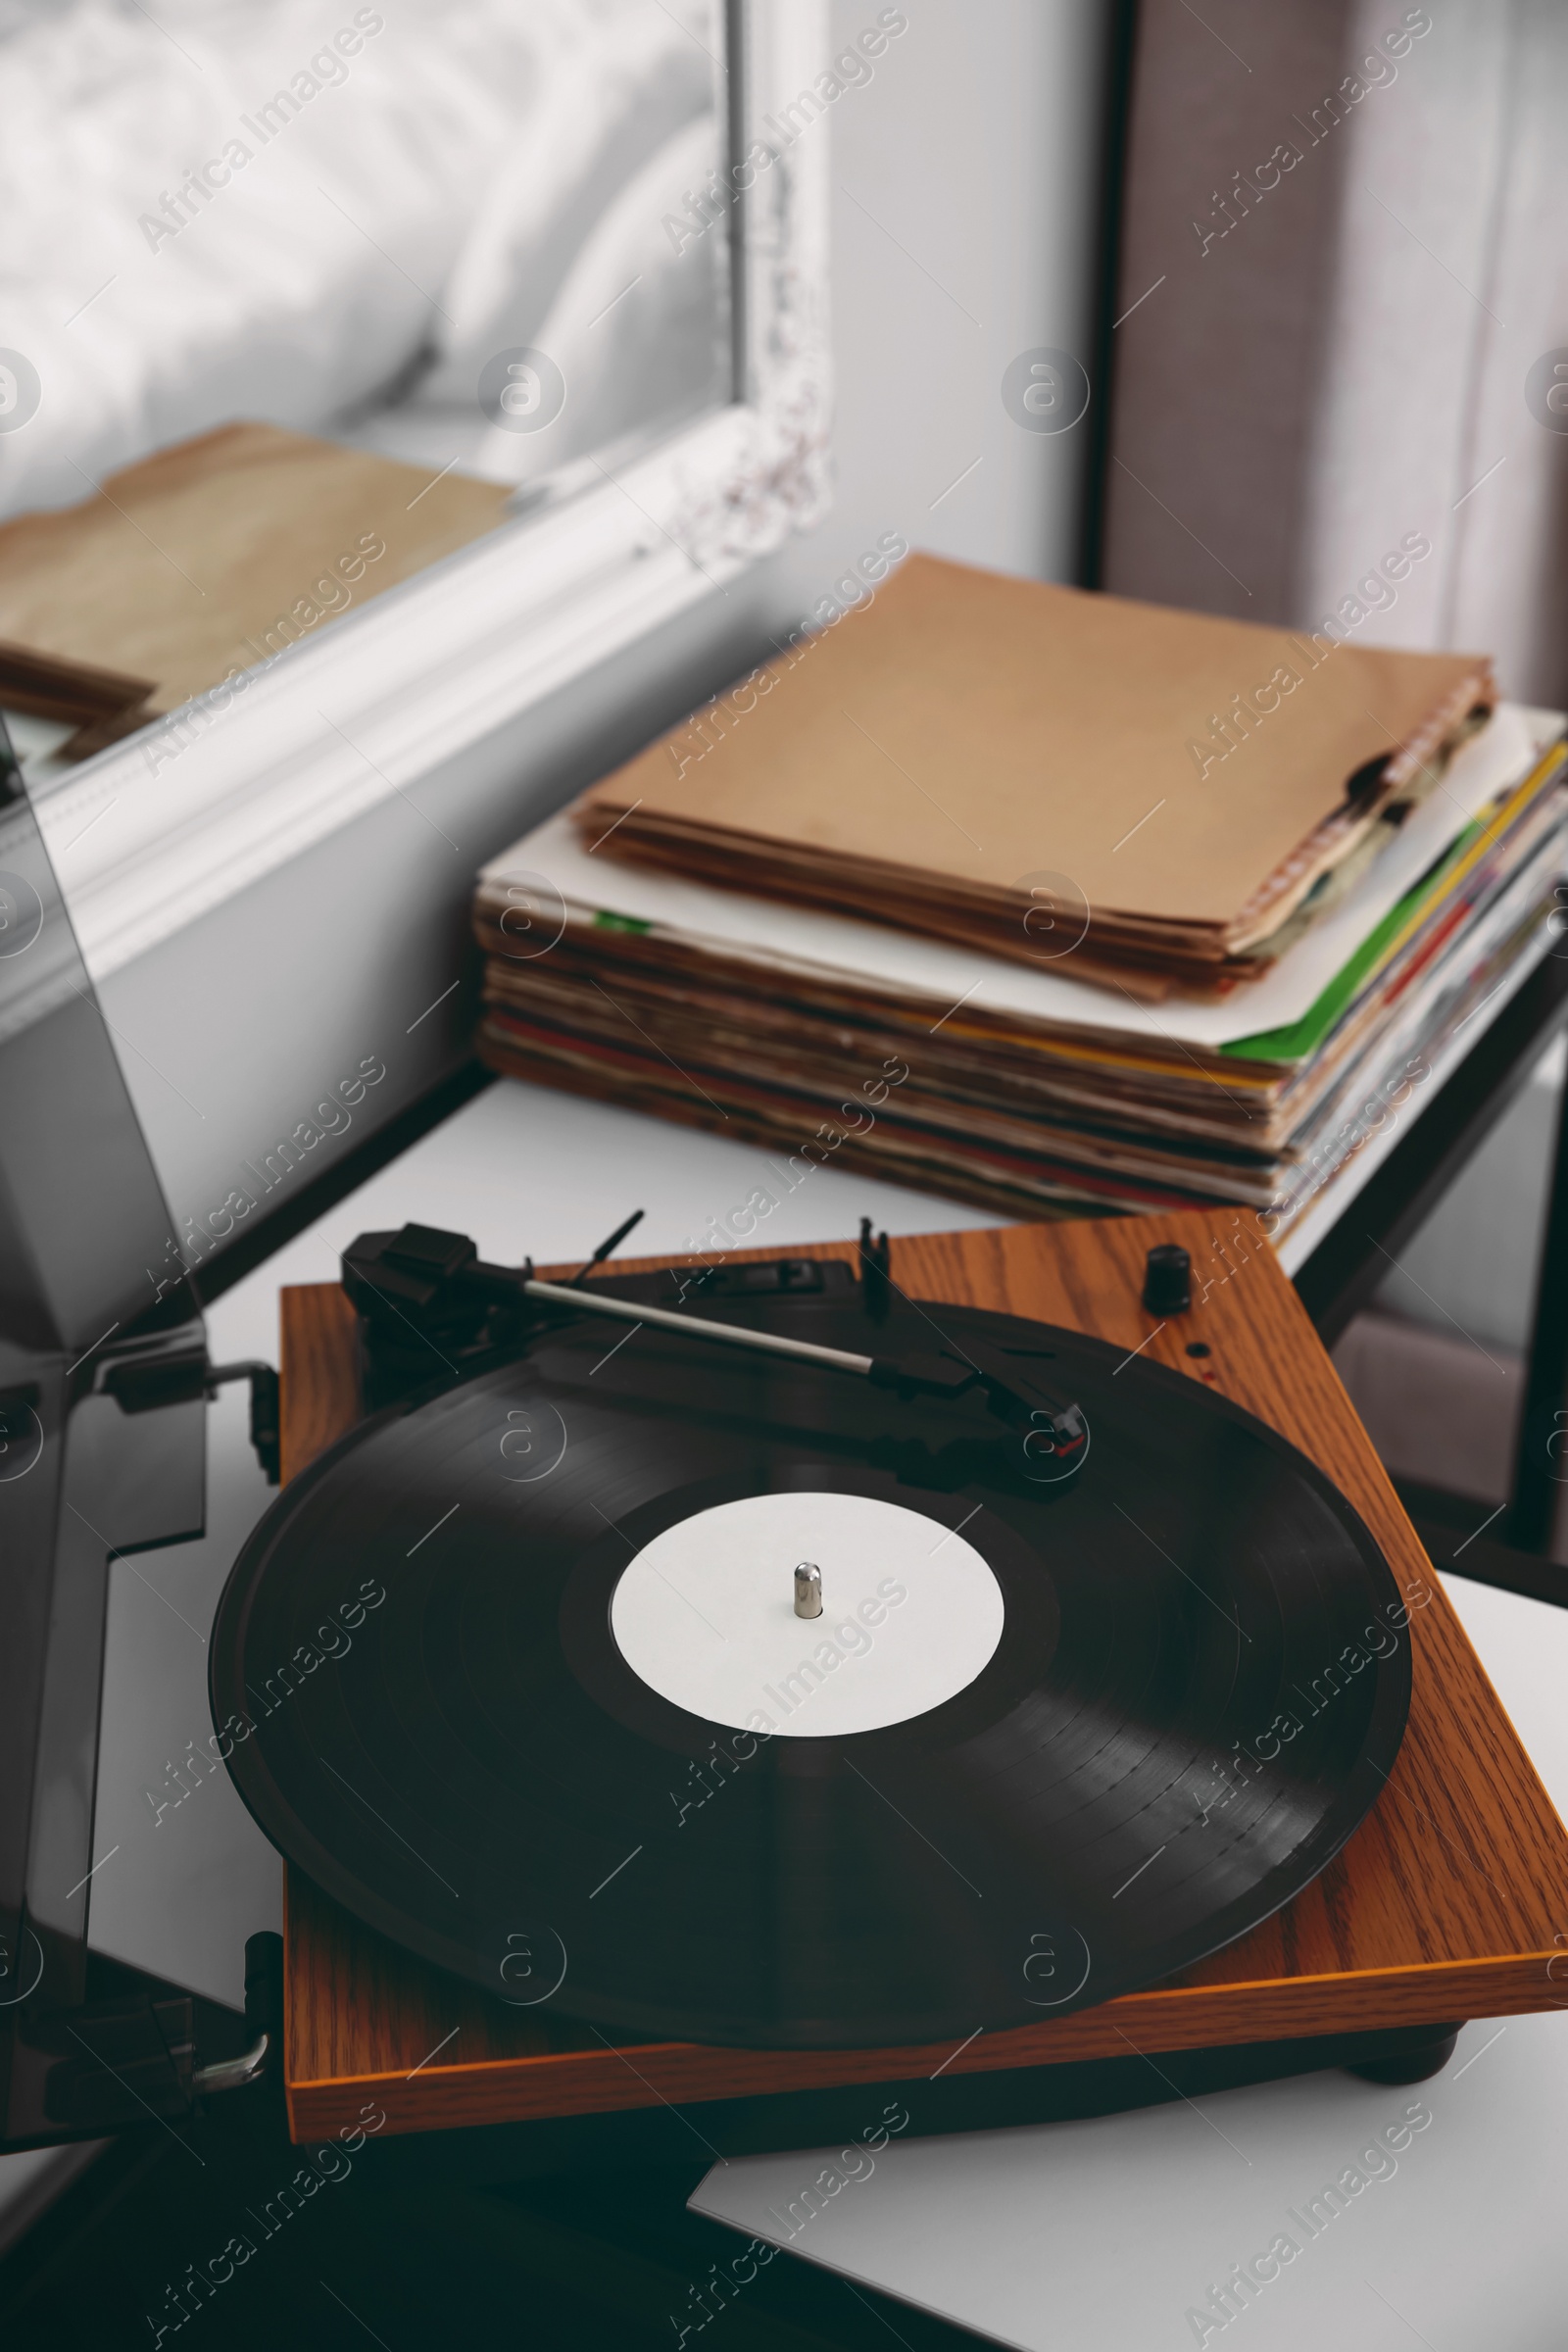 Image of Stylish turntable with vinyl record on table indoors